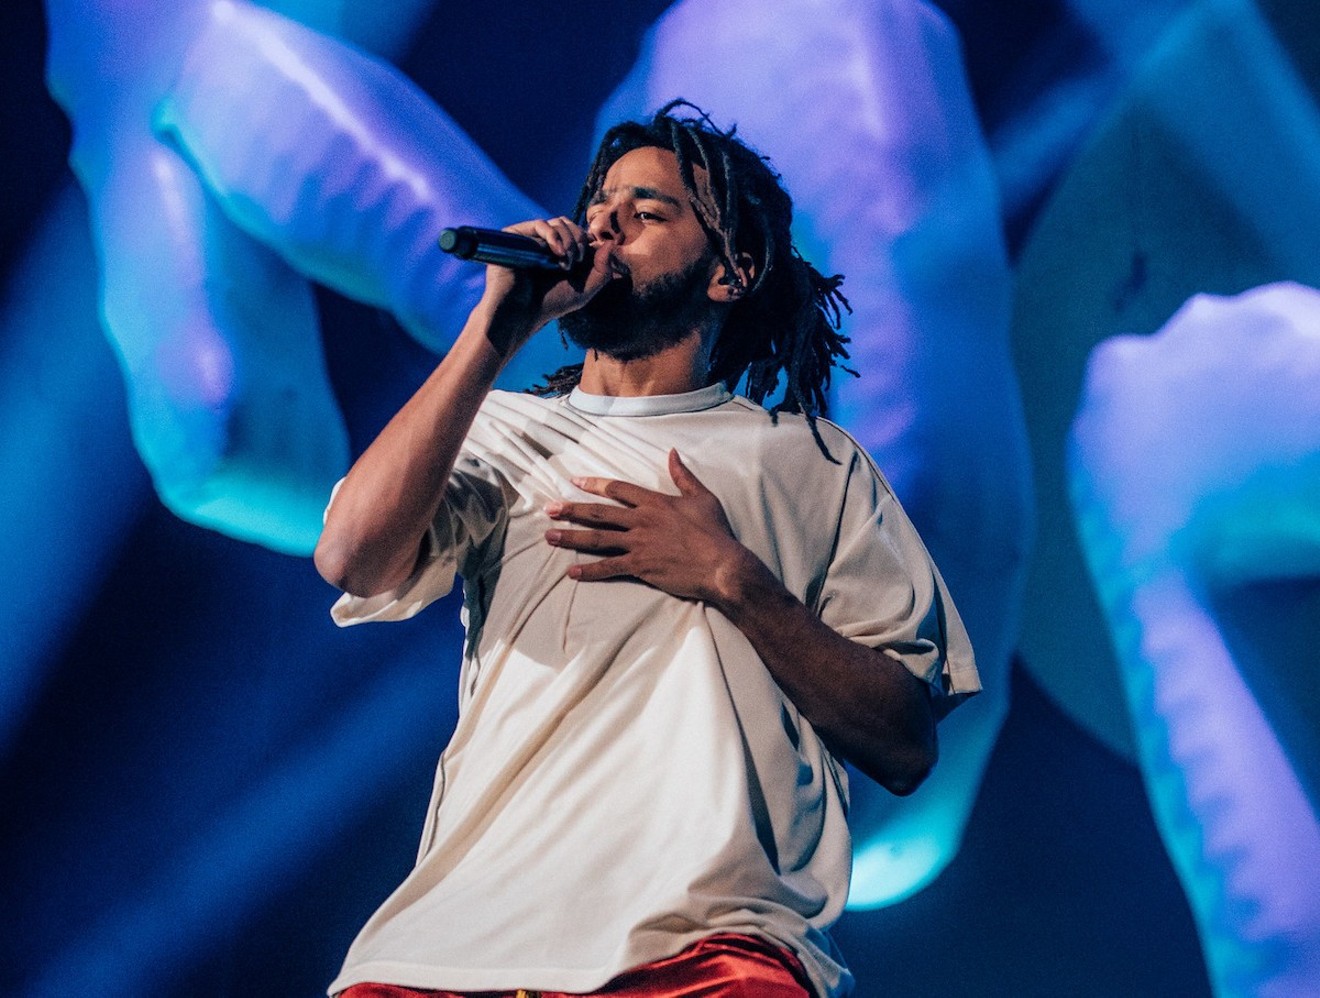 J. Cole performs in Toronto during his KOD Tour in 2018.